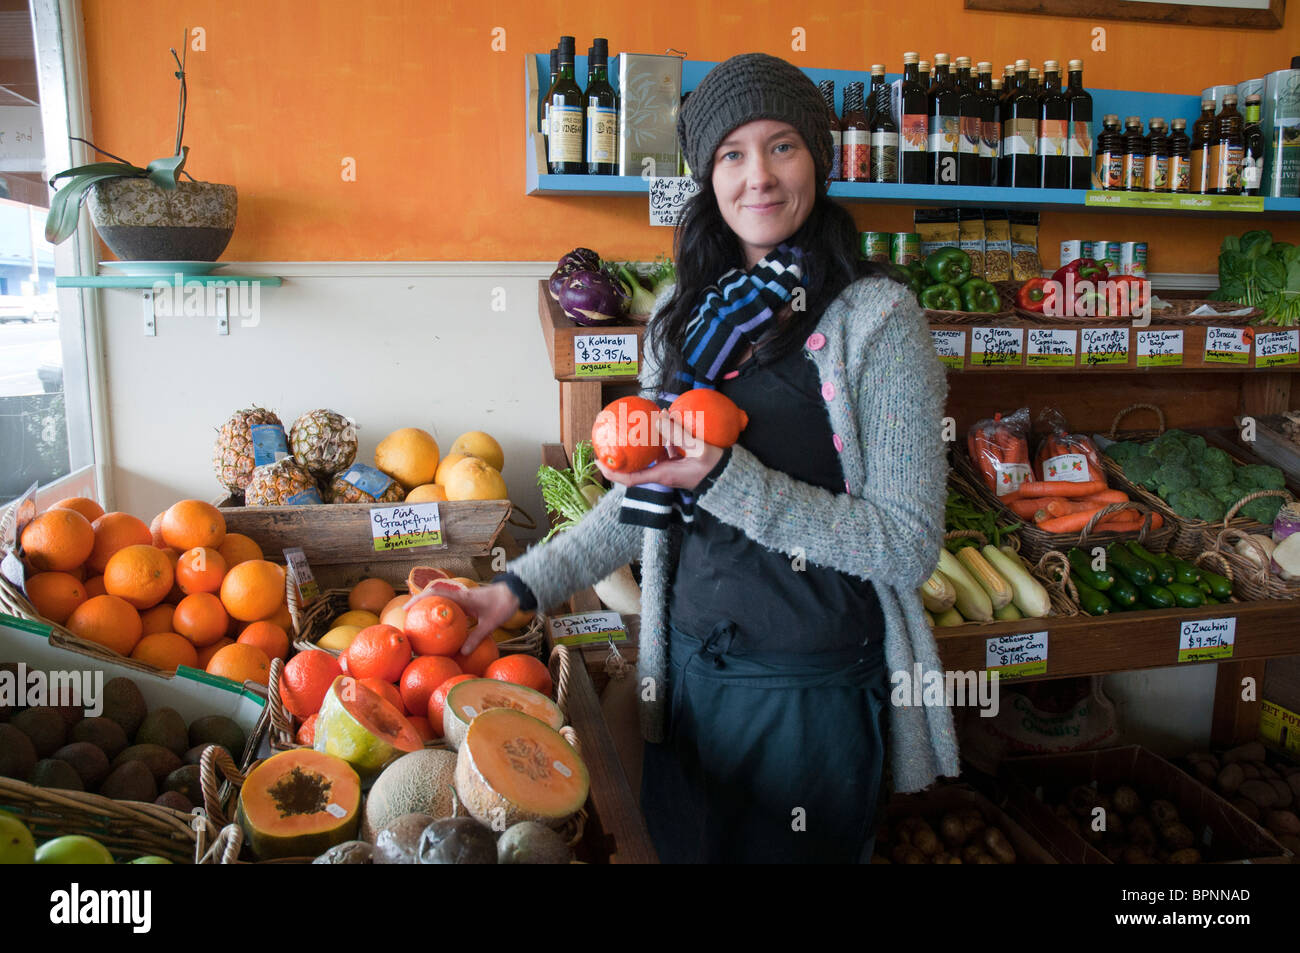 Shop assistant in an organic grocer's shop in Geelong in Australia Stock Photo